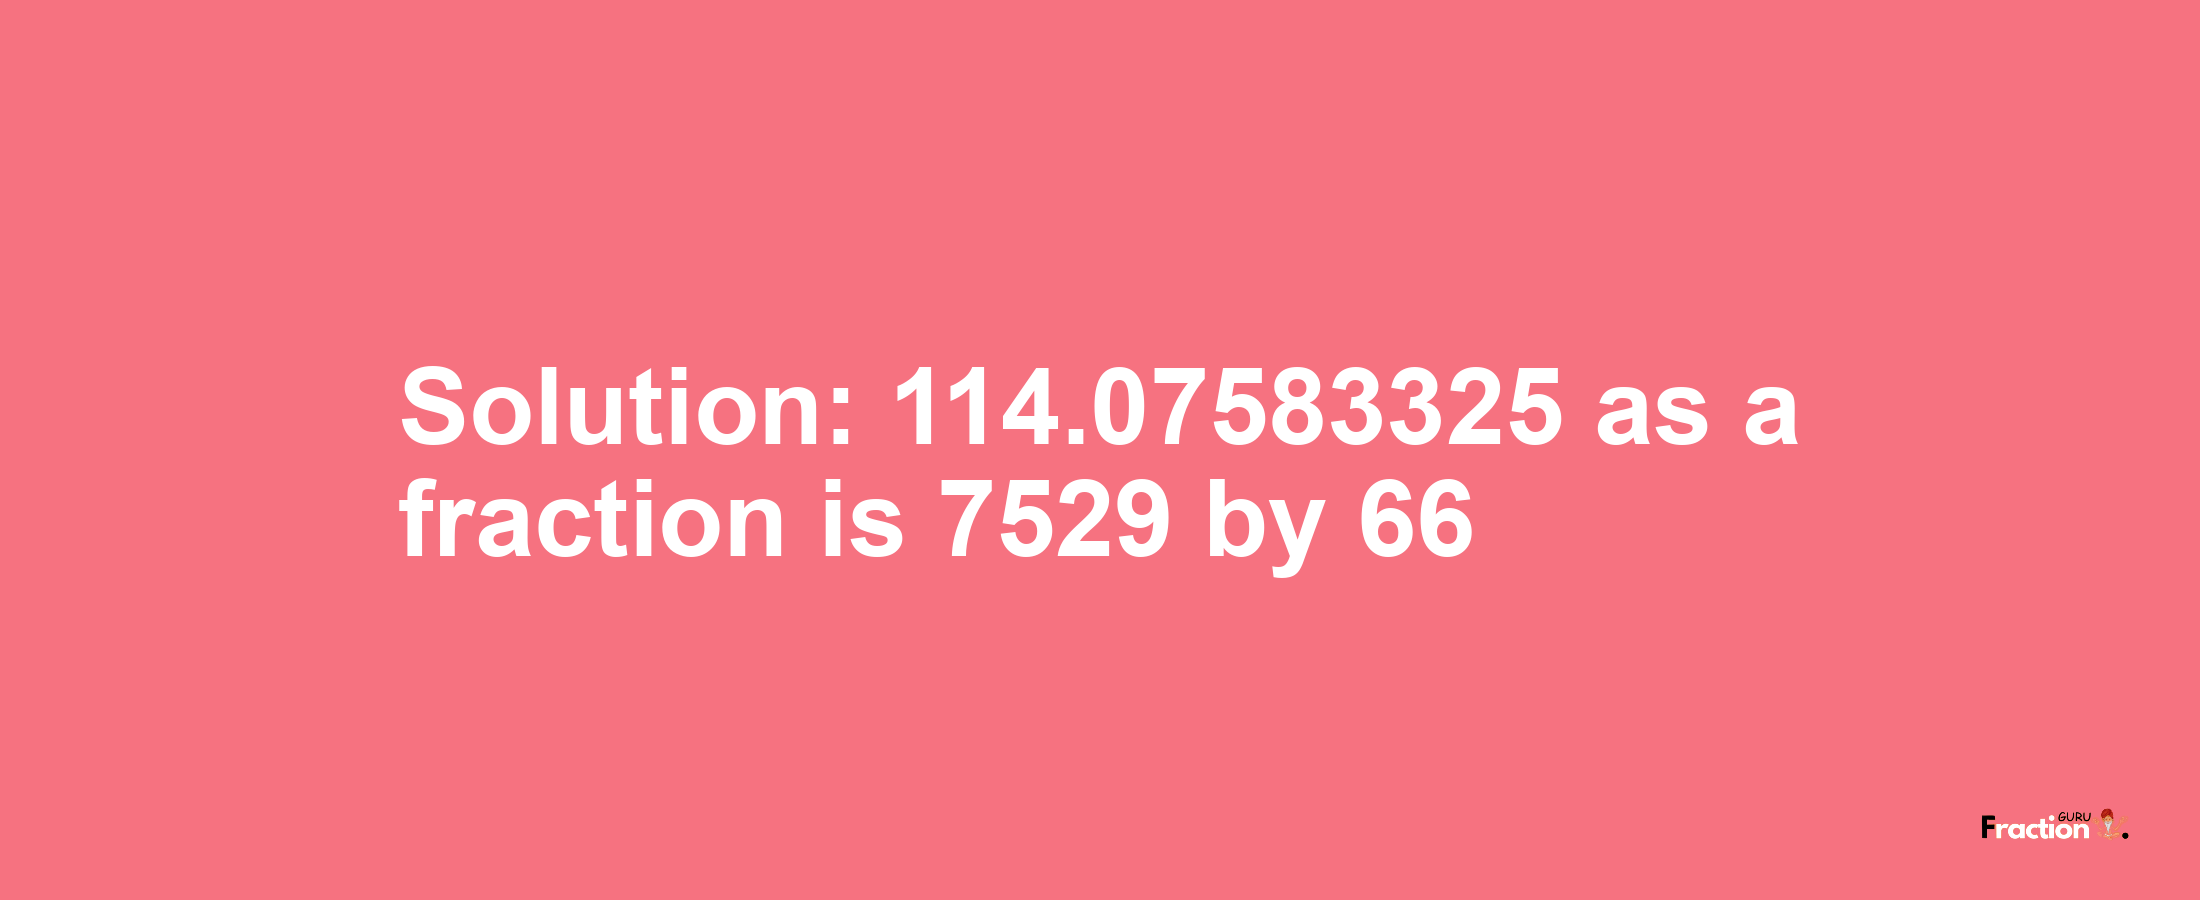 Solution:114.07583325 as a fraction is 7529/66